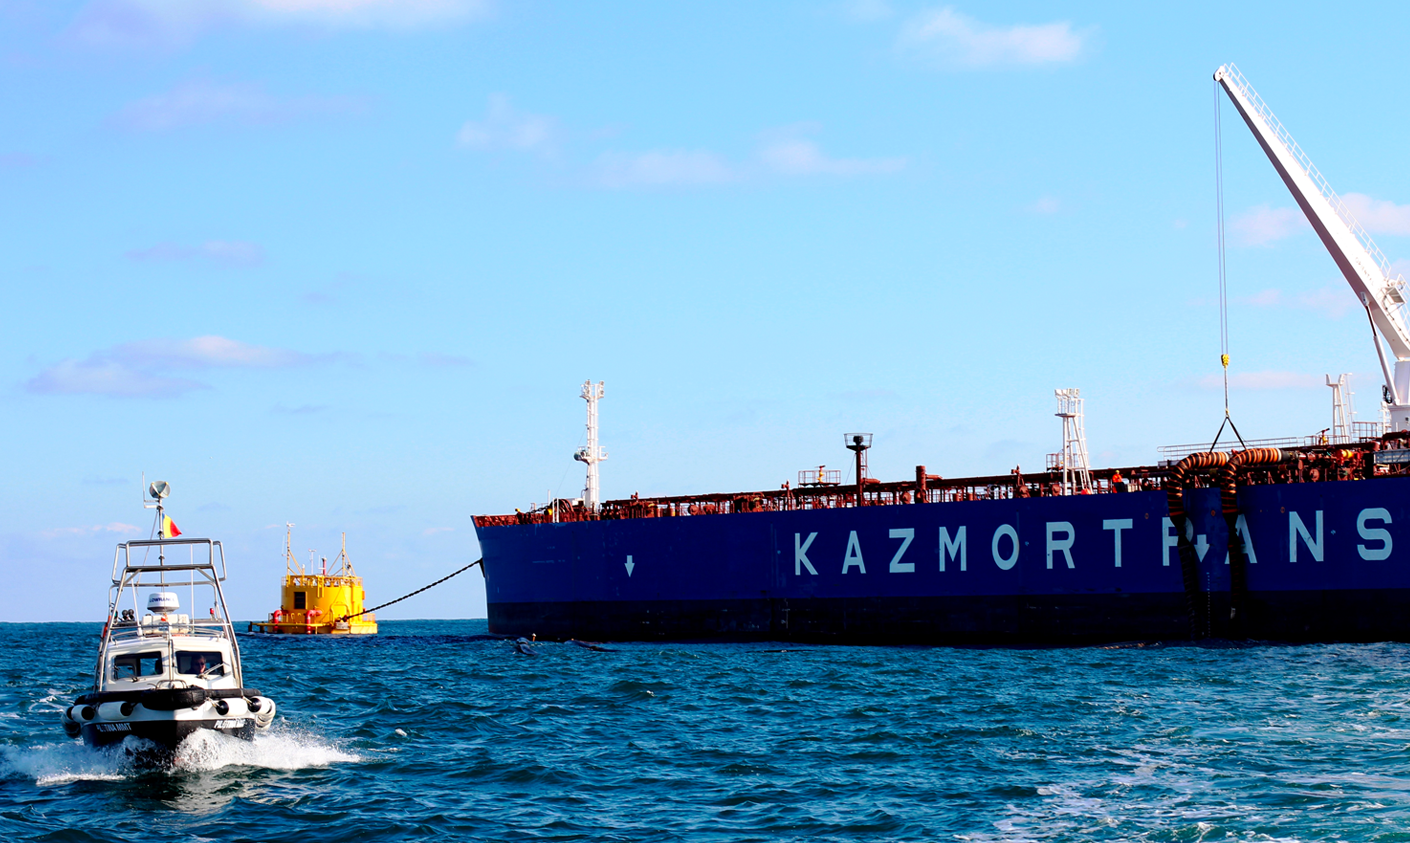 Over 32 million tons of crude transferred by KMG International through Black Sea Marine Terminal in 10 years of activity